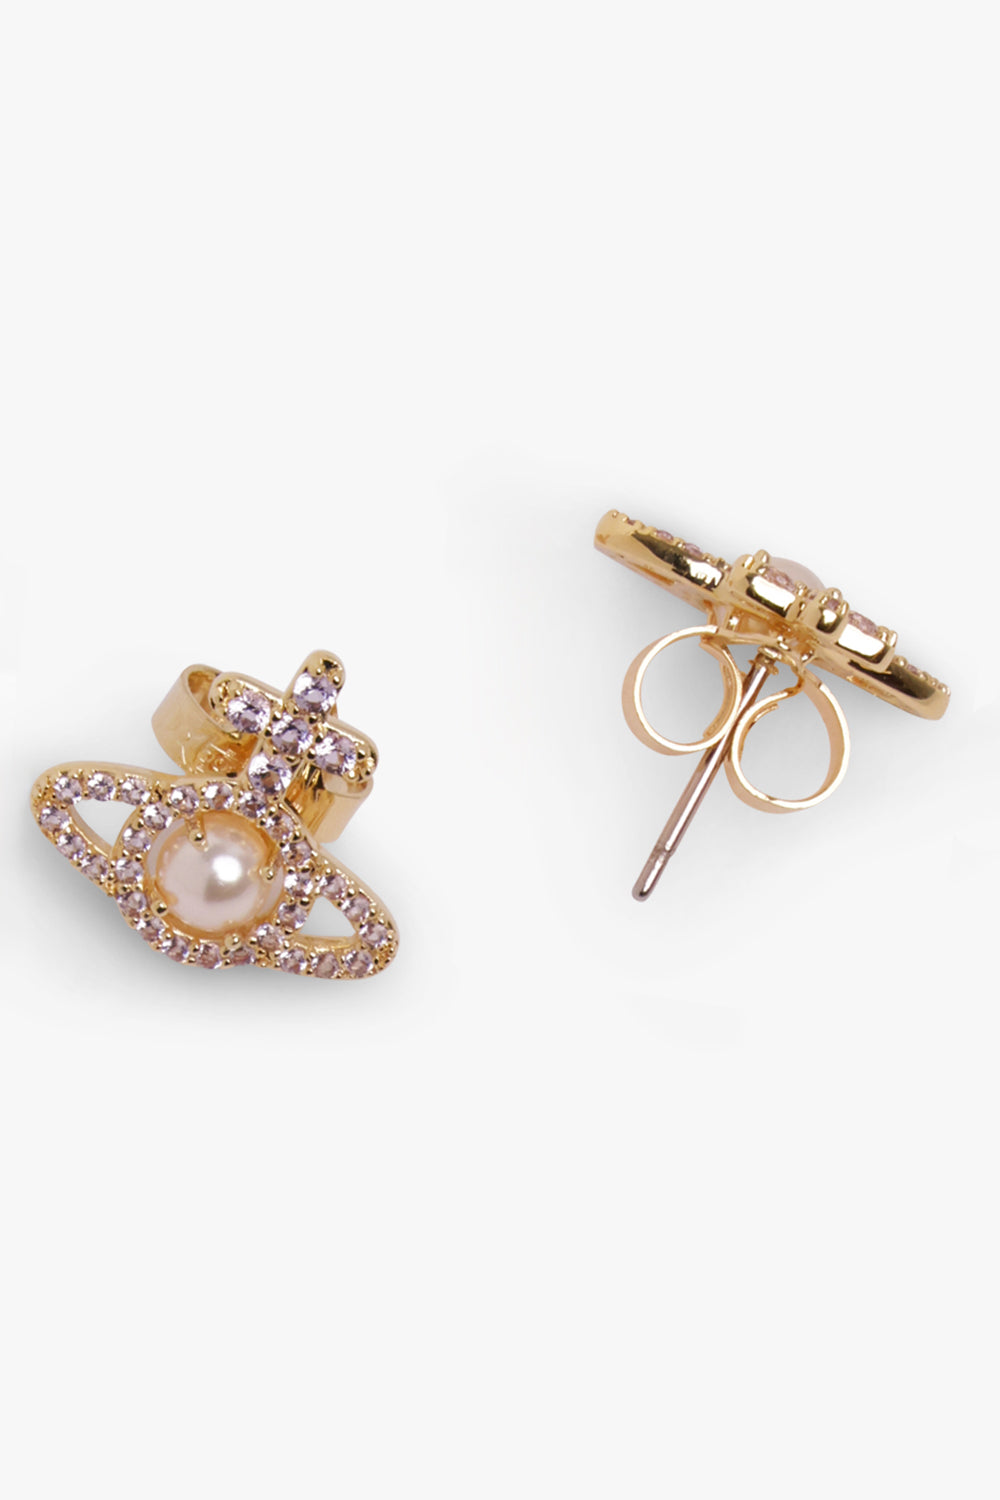 VIVIENNE WESTWOOD JEWELLRY GOLD / GOLD OLYMPIA PEARL EARRINGS | CREAM ROSE PEARL/GOLD